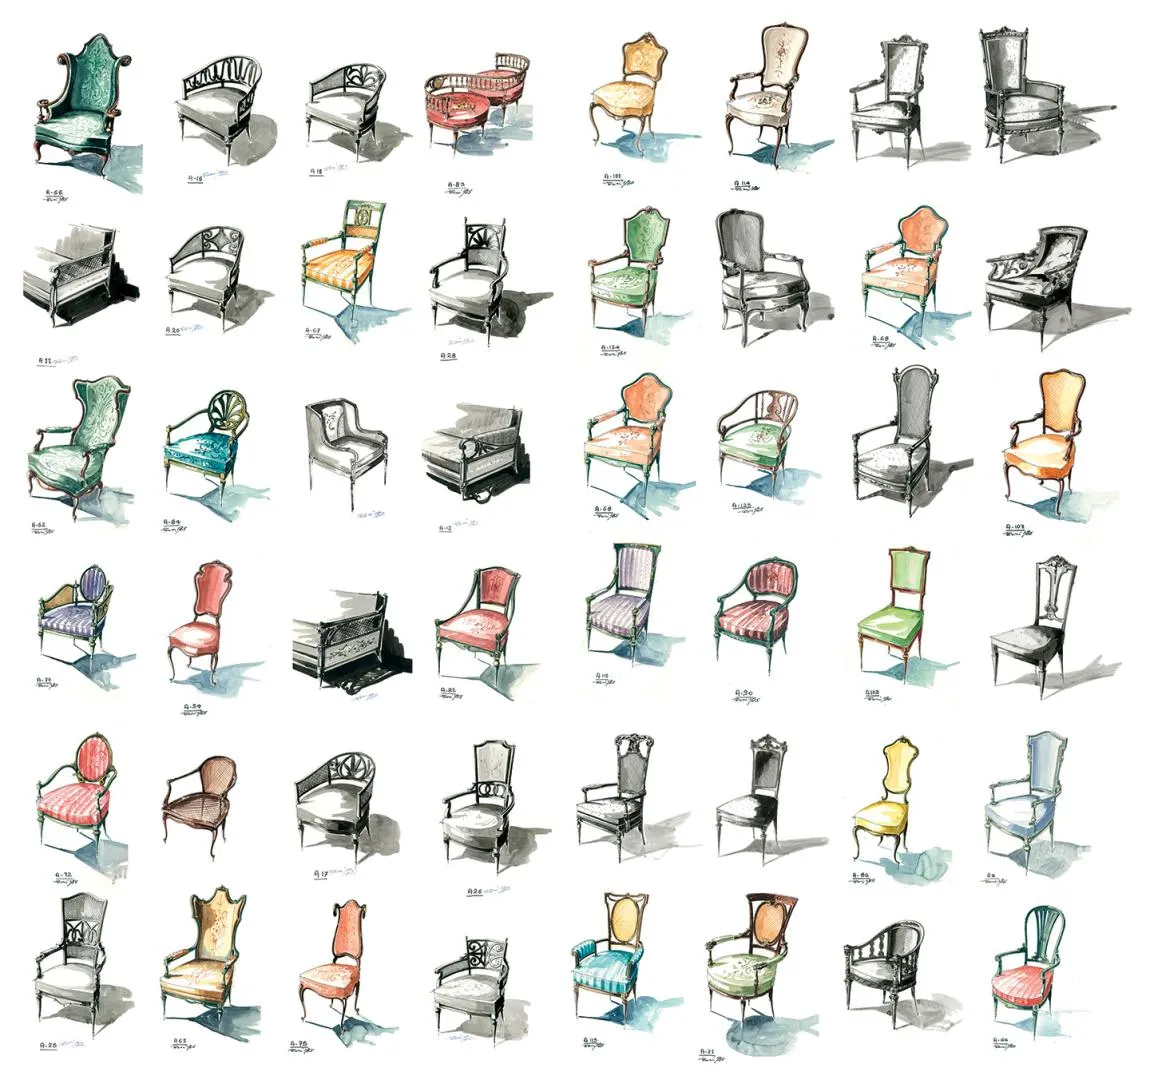 1960s chairs